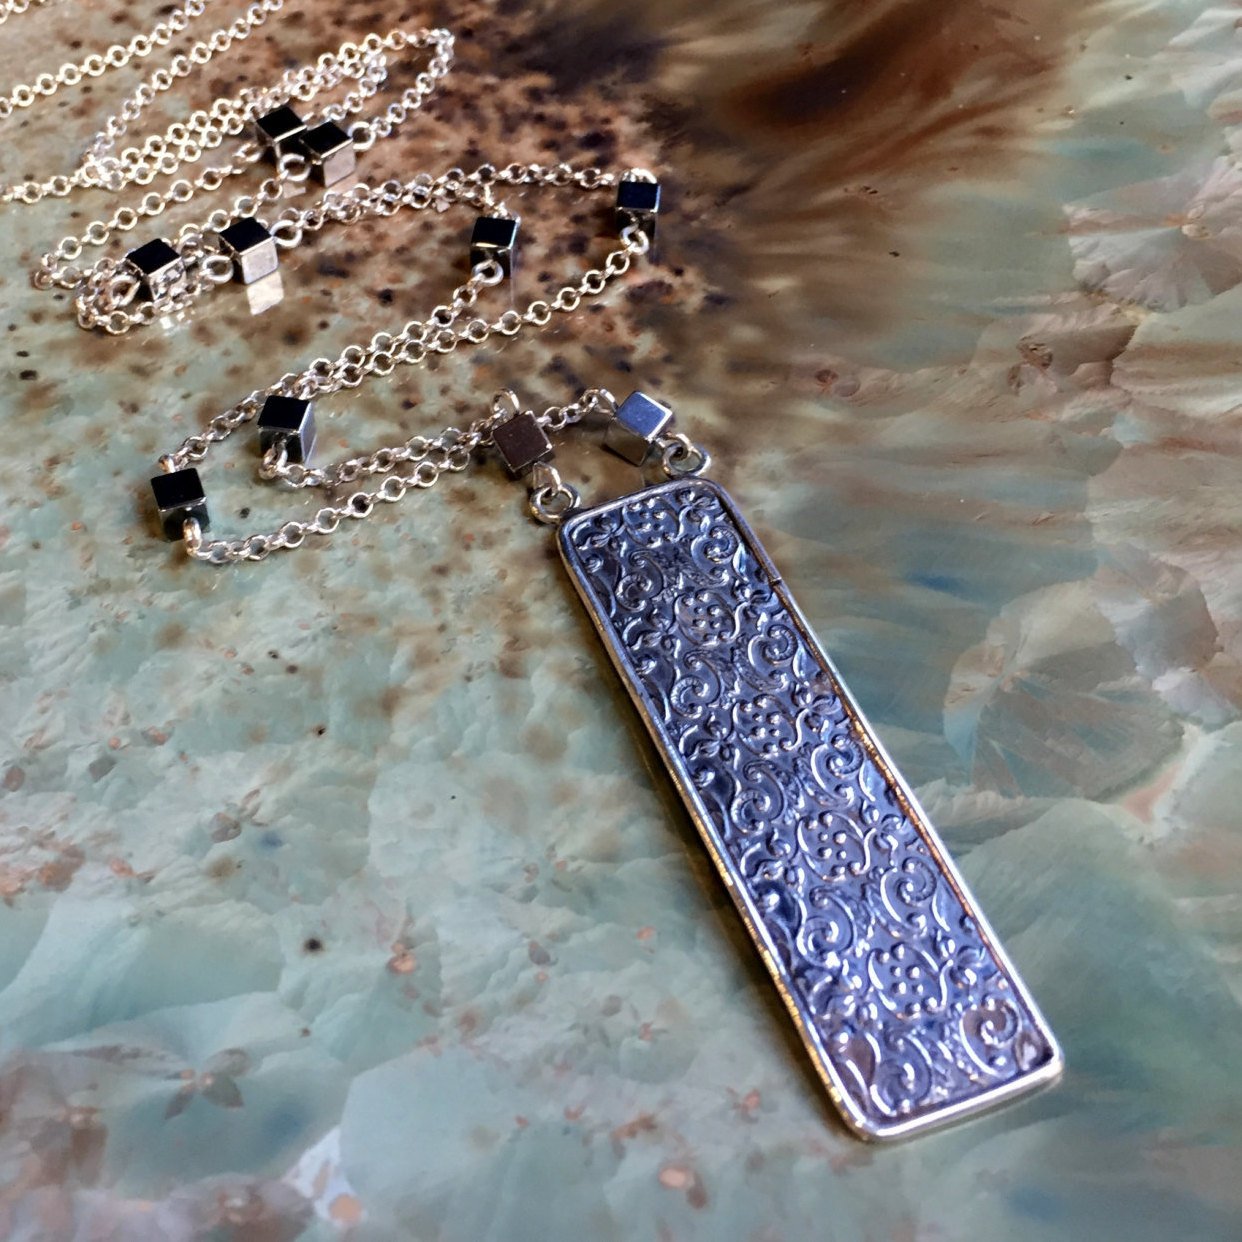 Silver Necklace, Silver Filigree pendant, Woodland Necklace, pyrite silver necklace, rectangle Pendant, long chain - Our Finest Days N2040